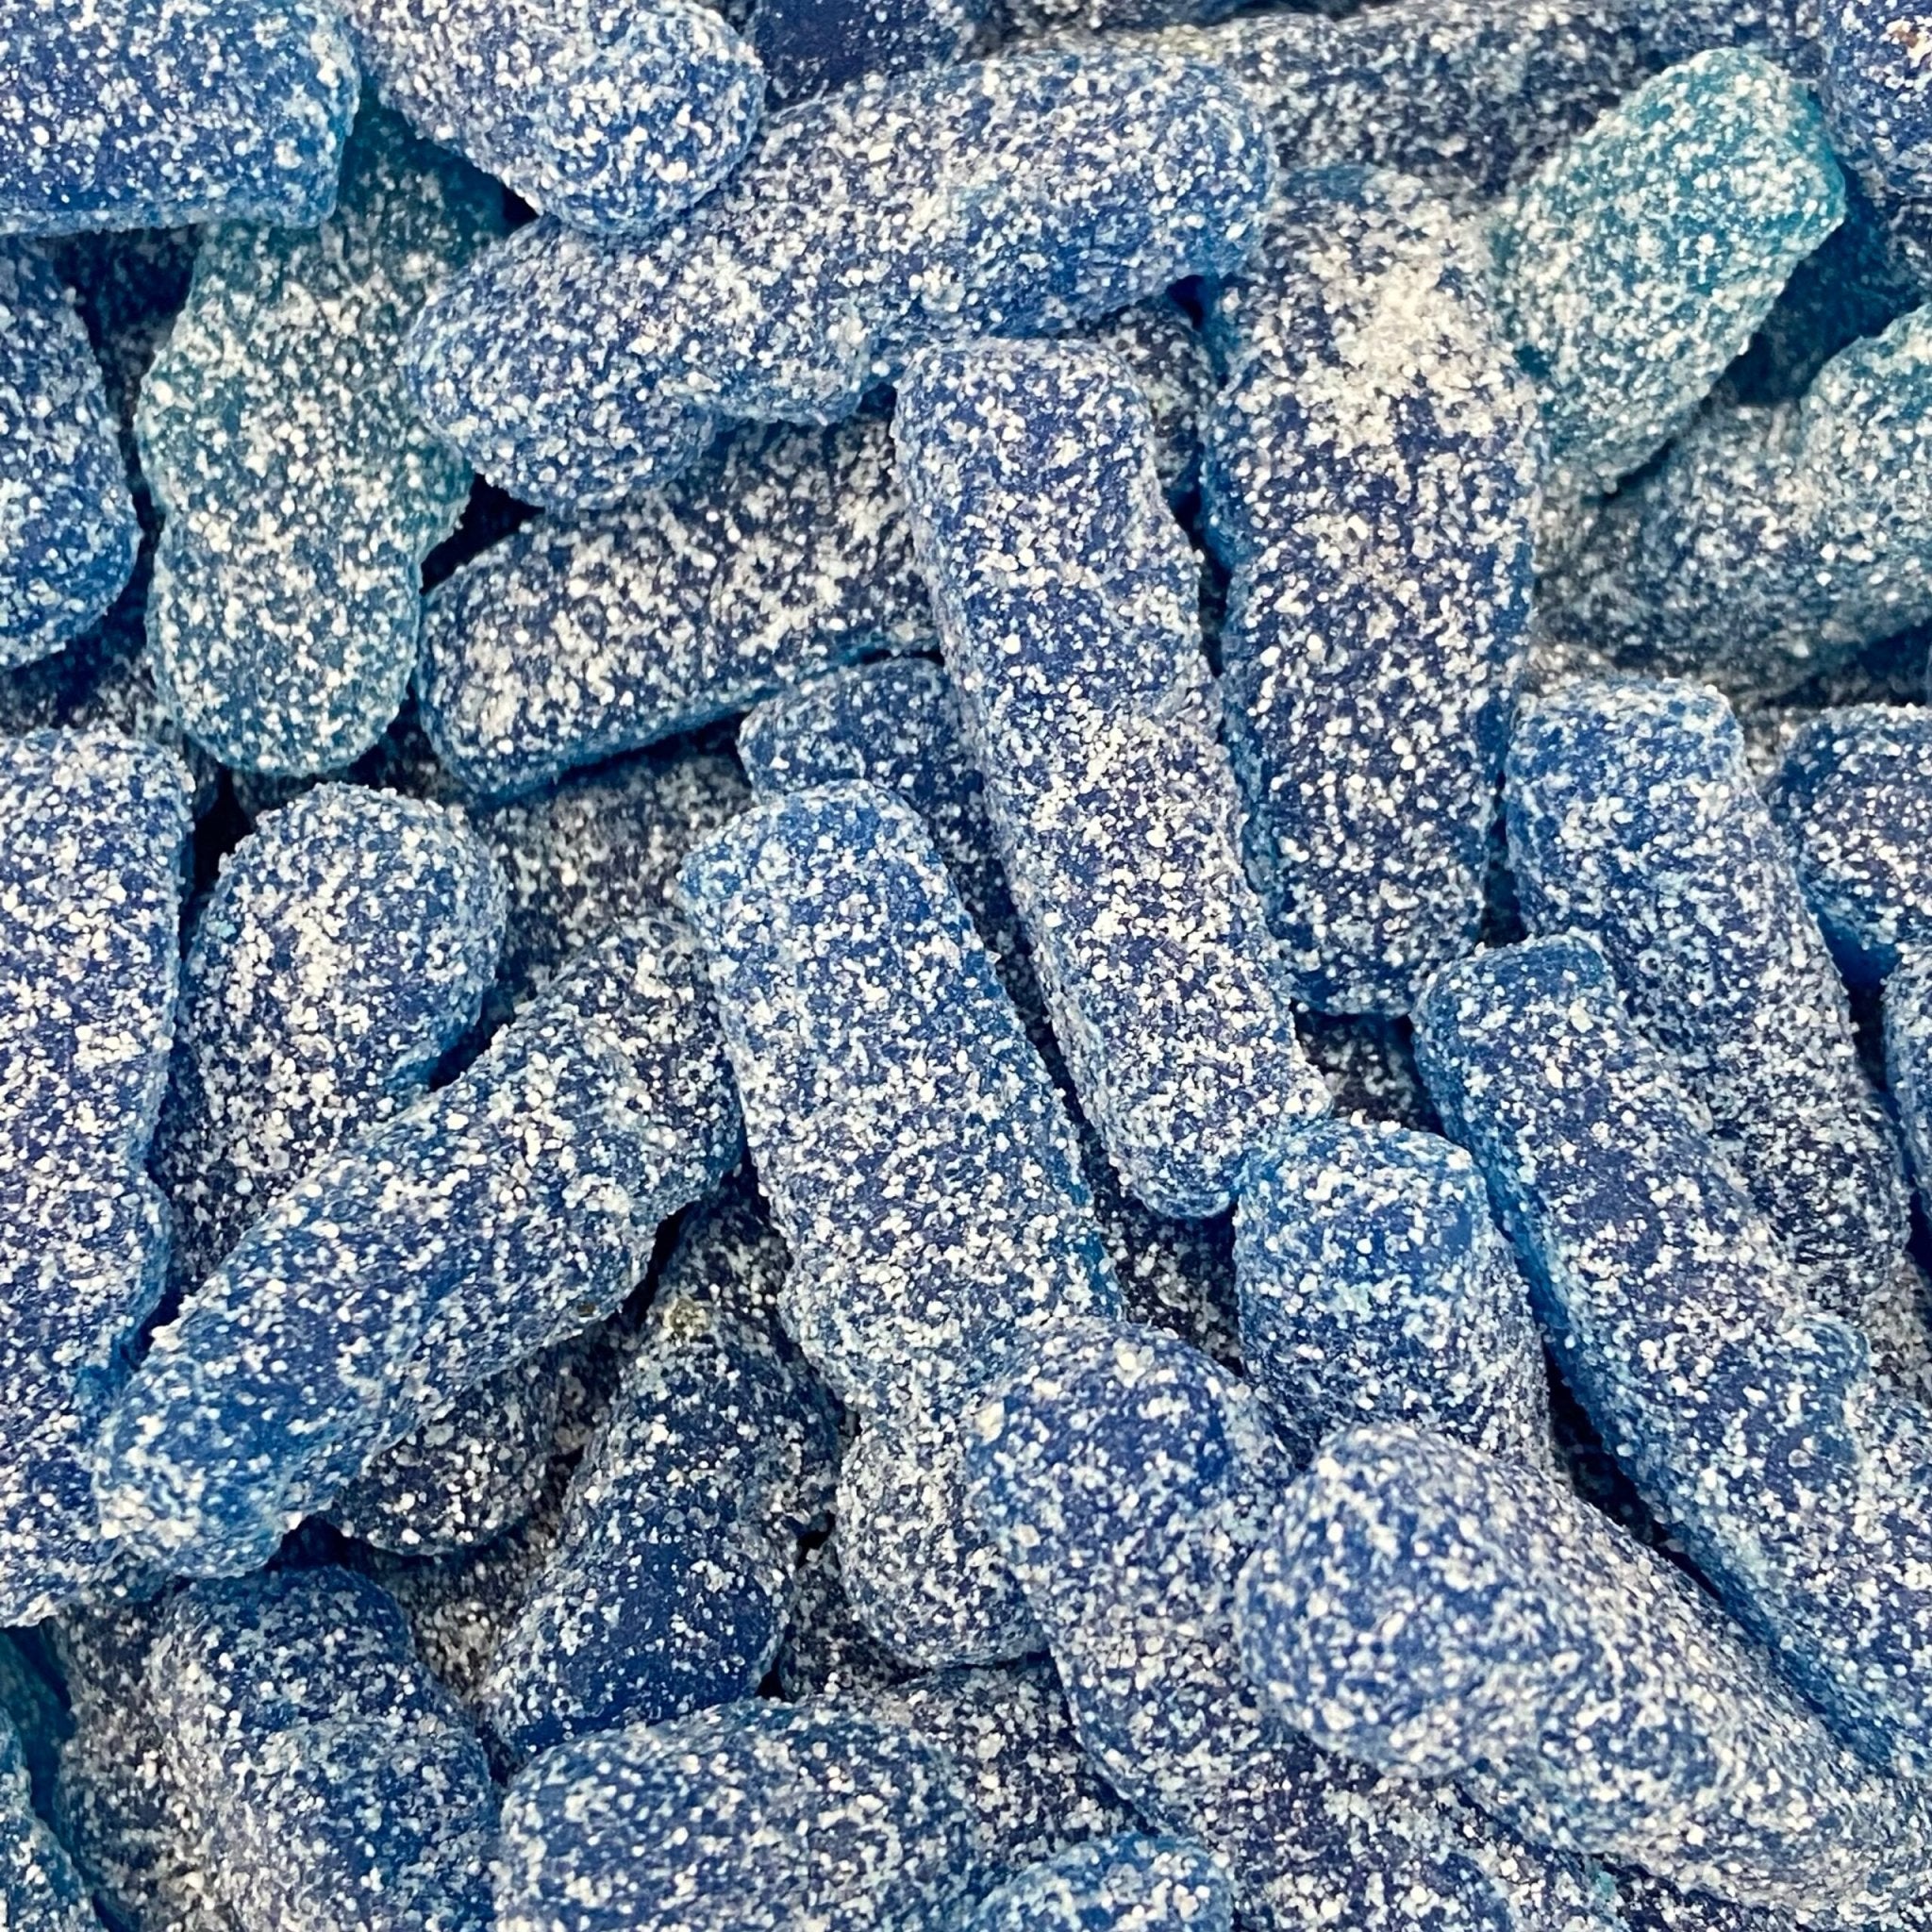 Blue jelly babies - Dream Candy